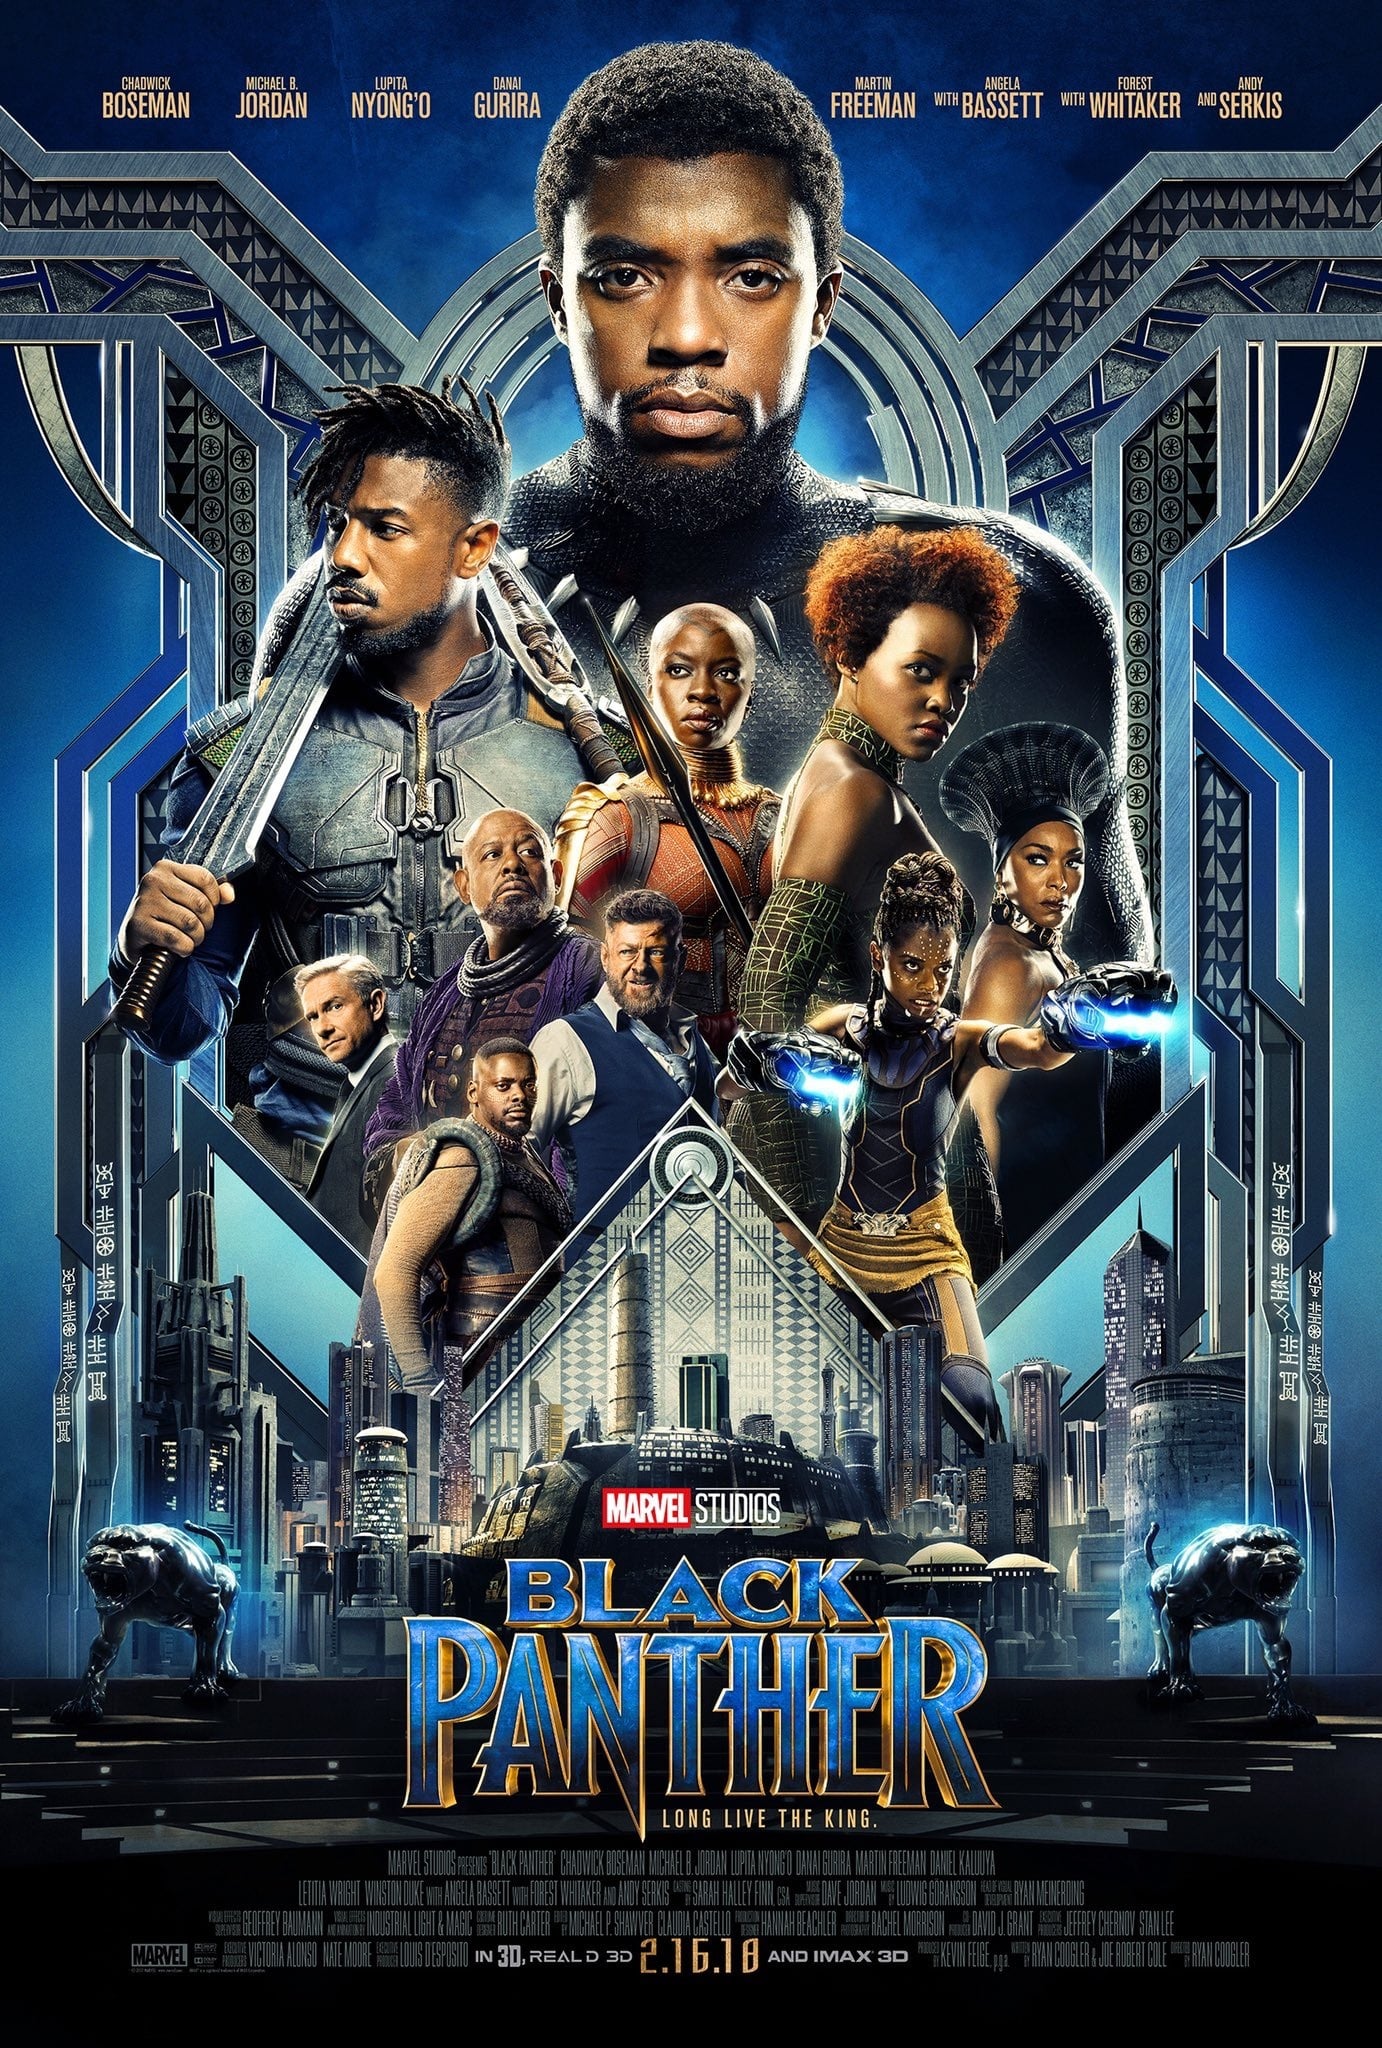 Black Panther Picture